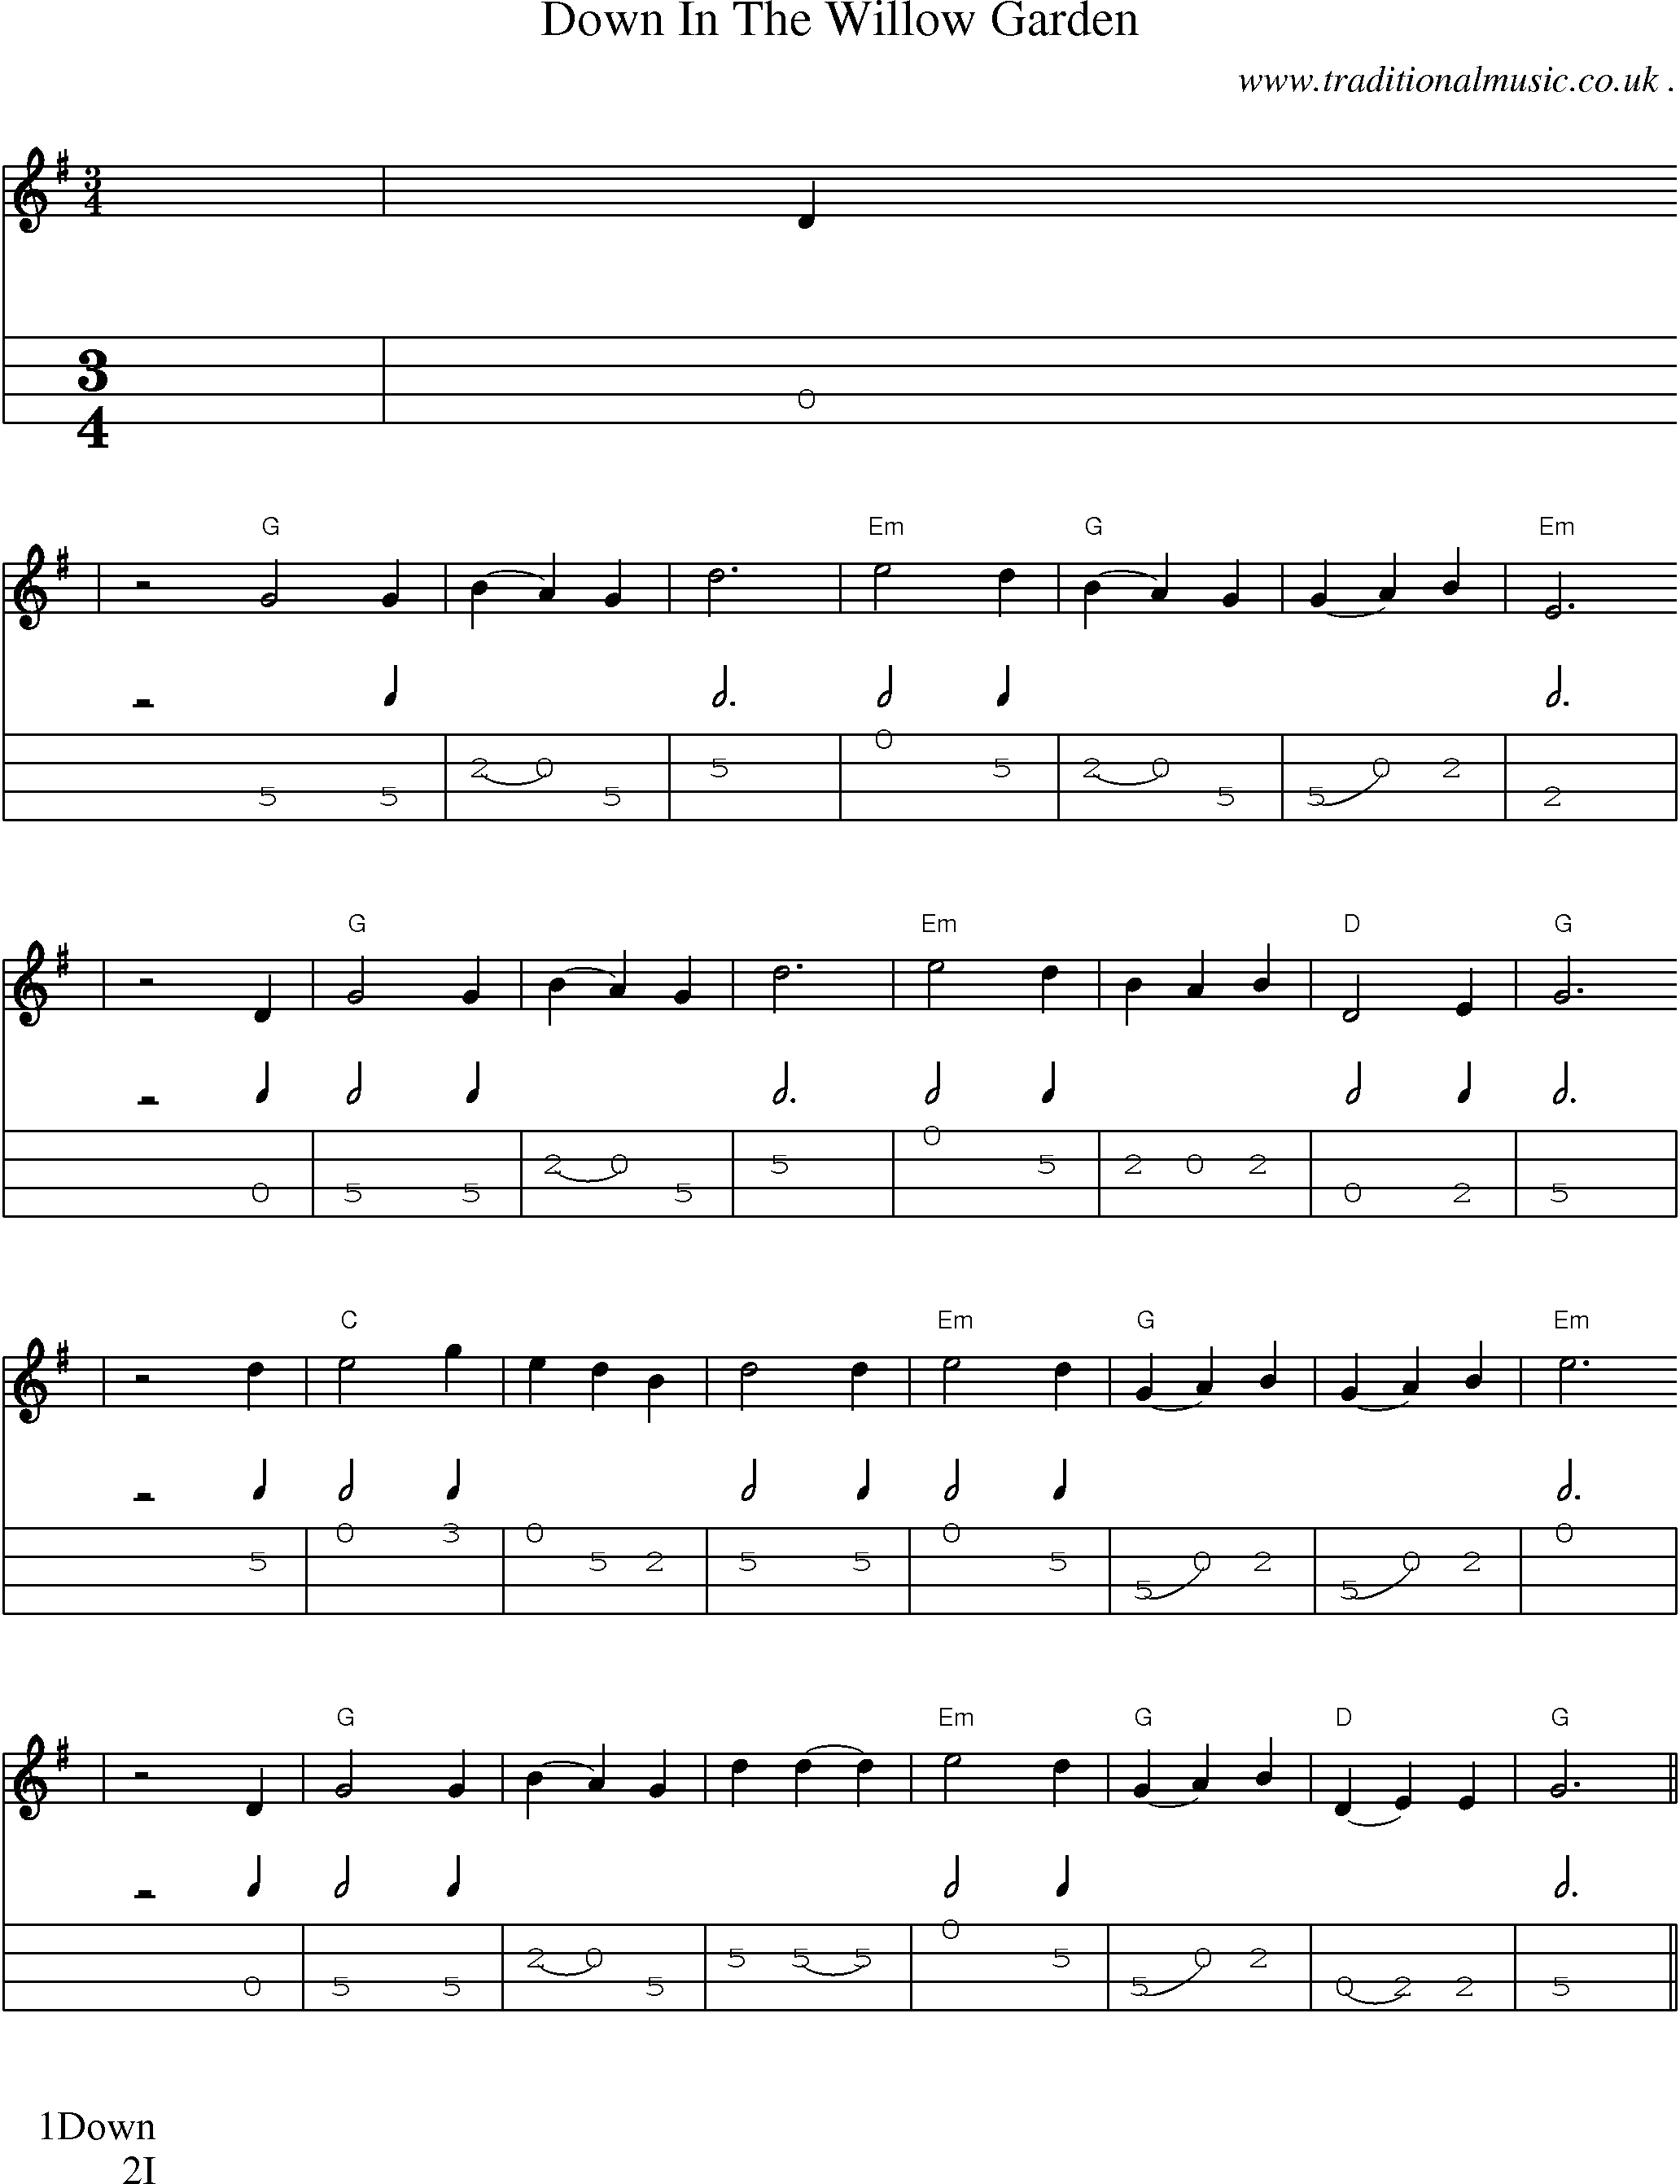 American Old Time Music Scores And Tabs For Mandolin Down In